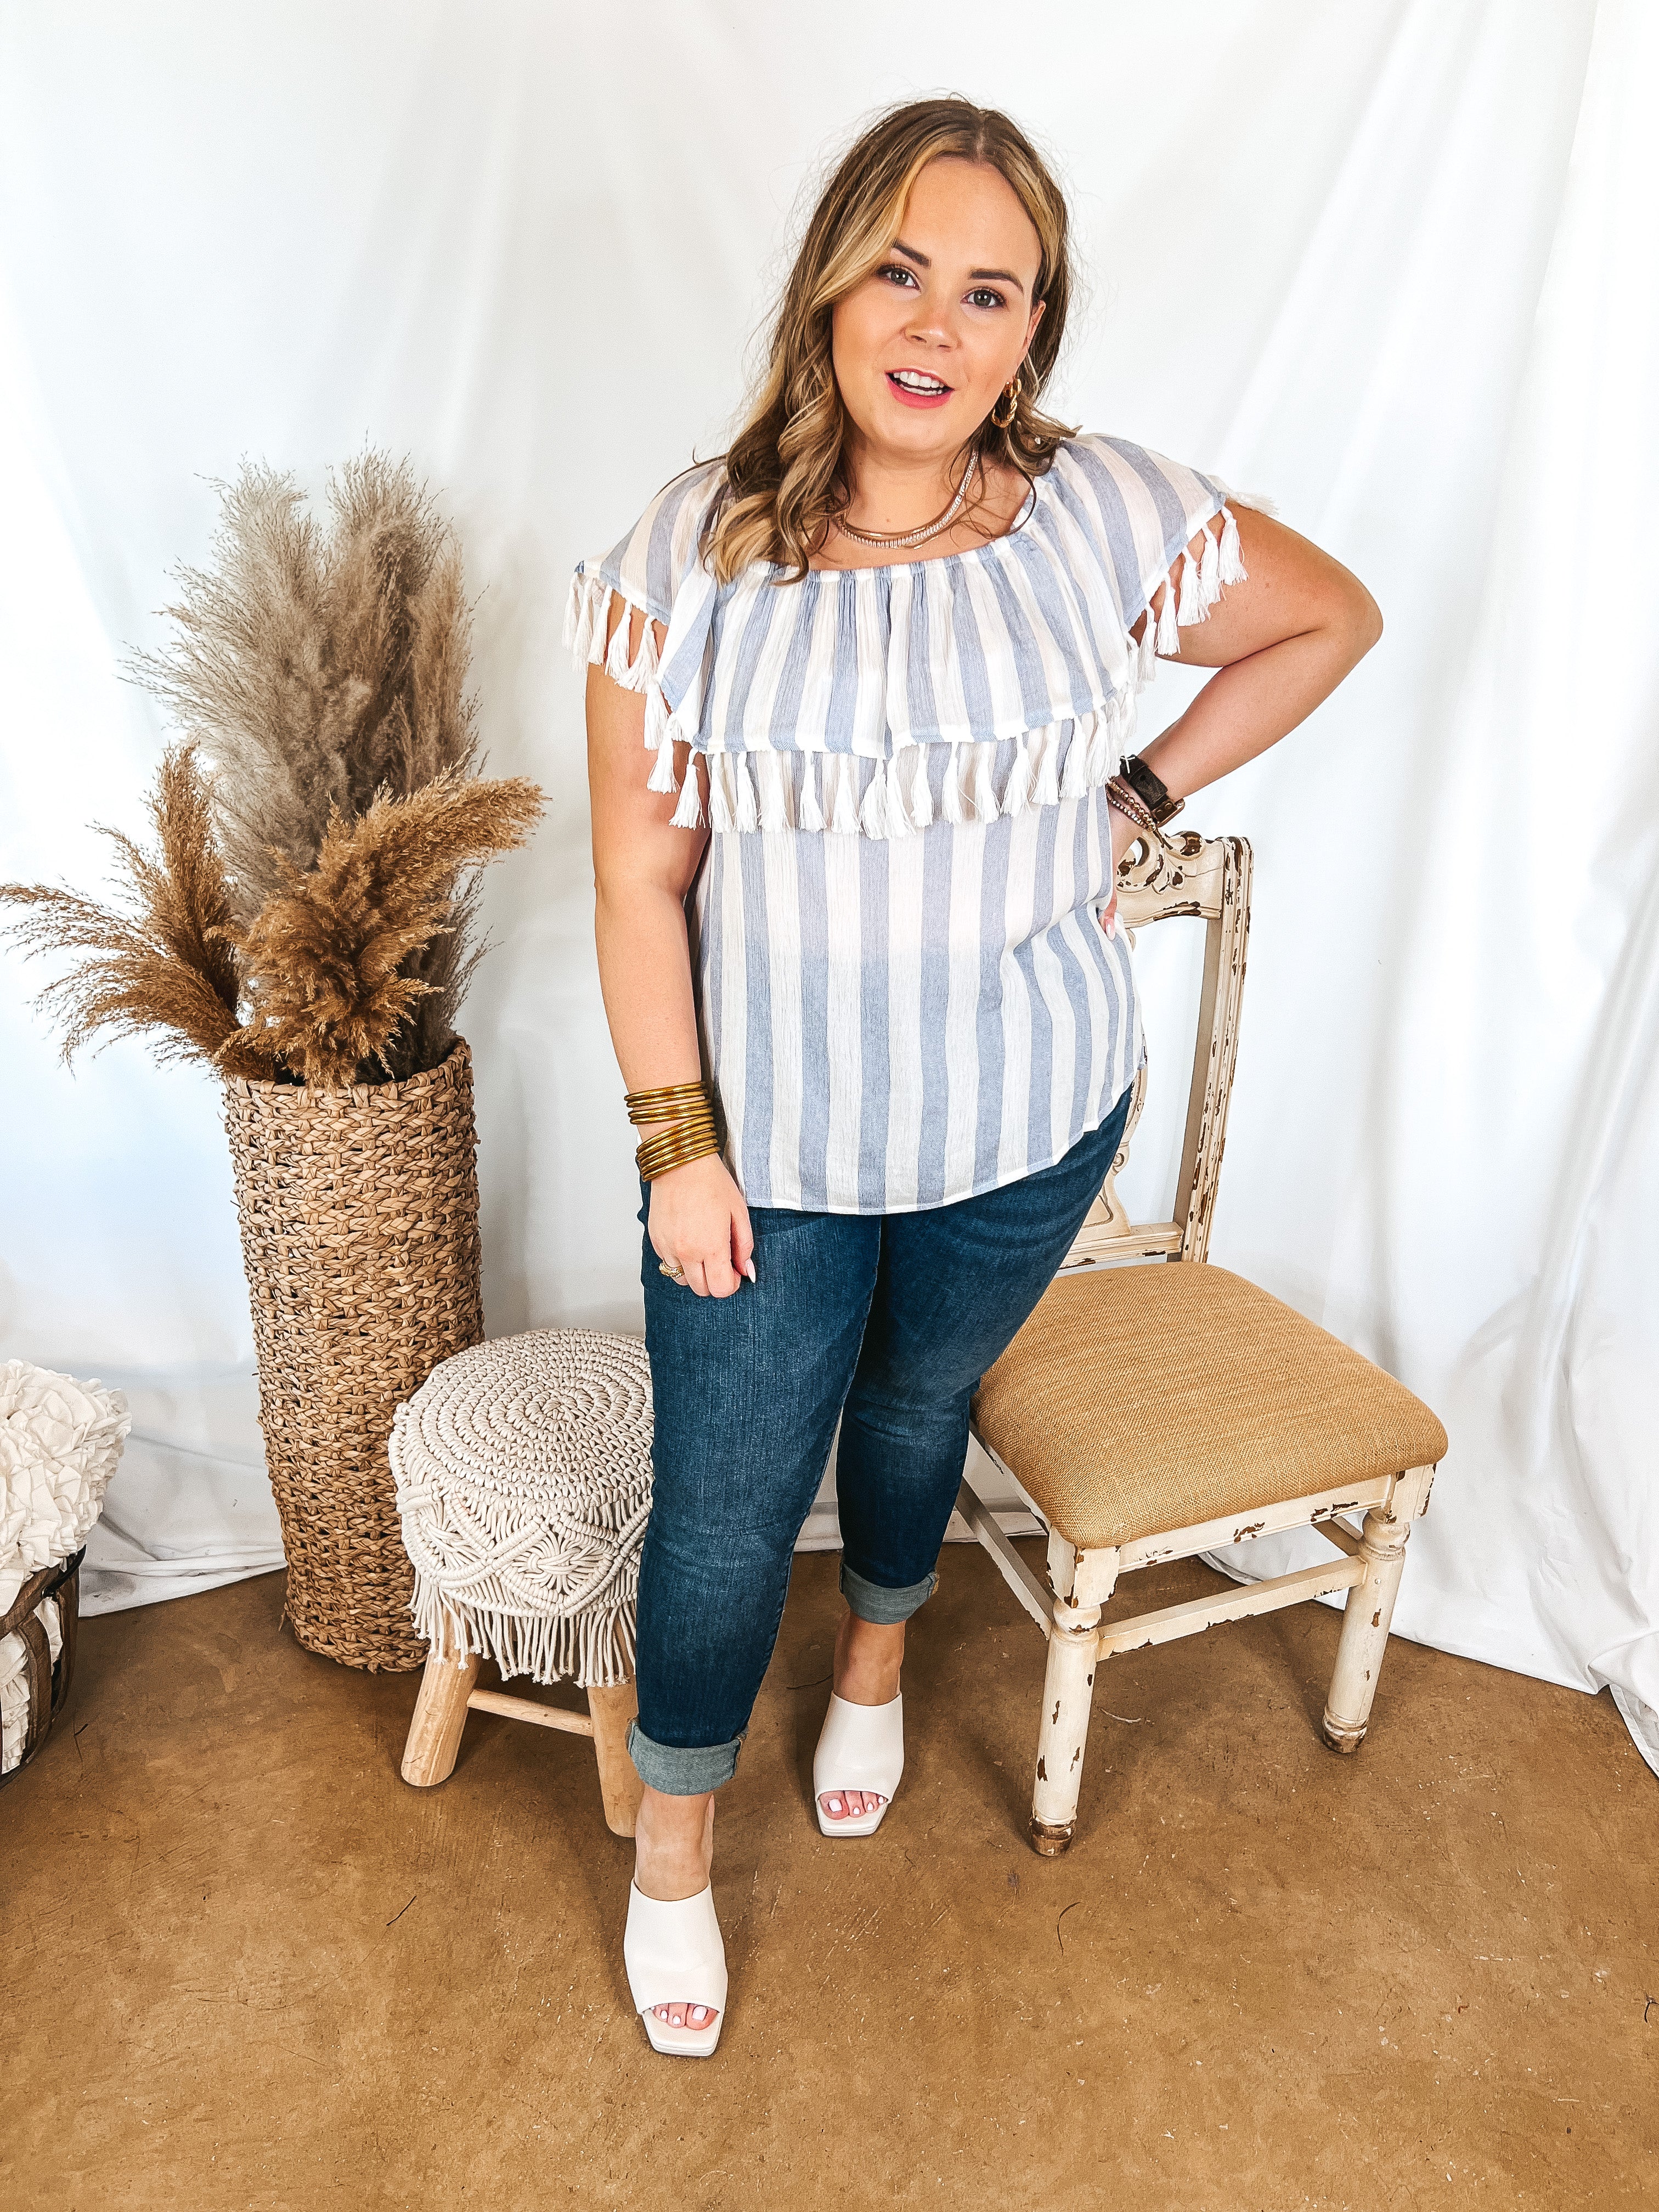 SoCal Sun Striped Off the Shoulder Top with Tassels in Ivory and Blue - Giddy Up Glamour Boutique